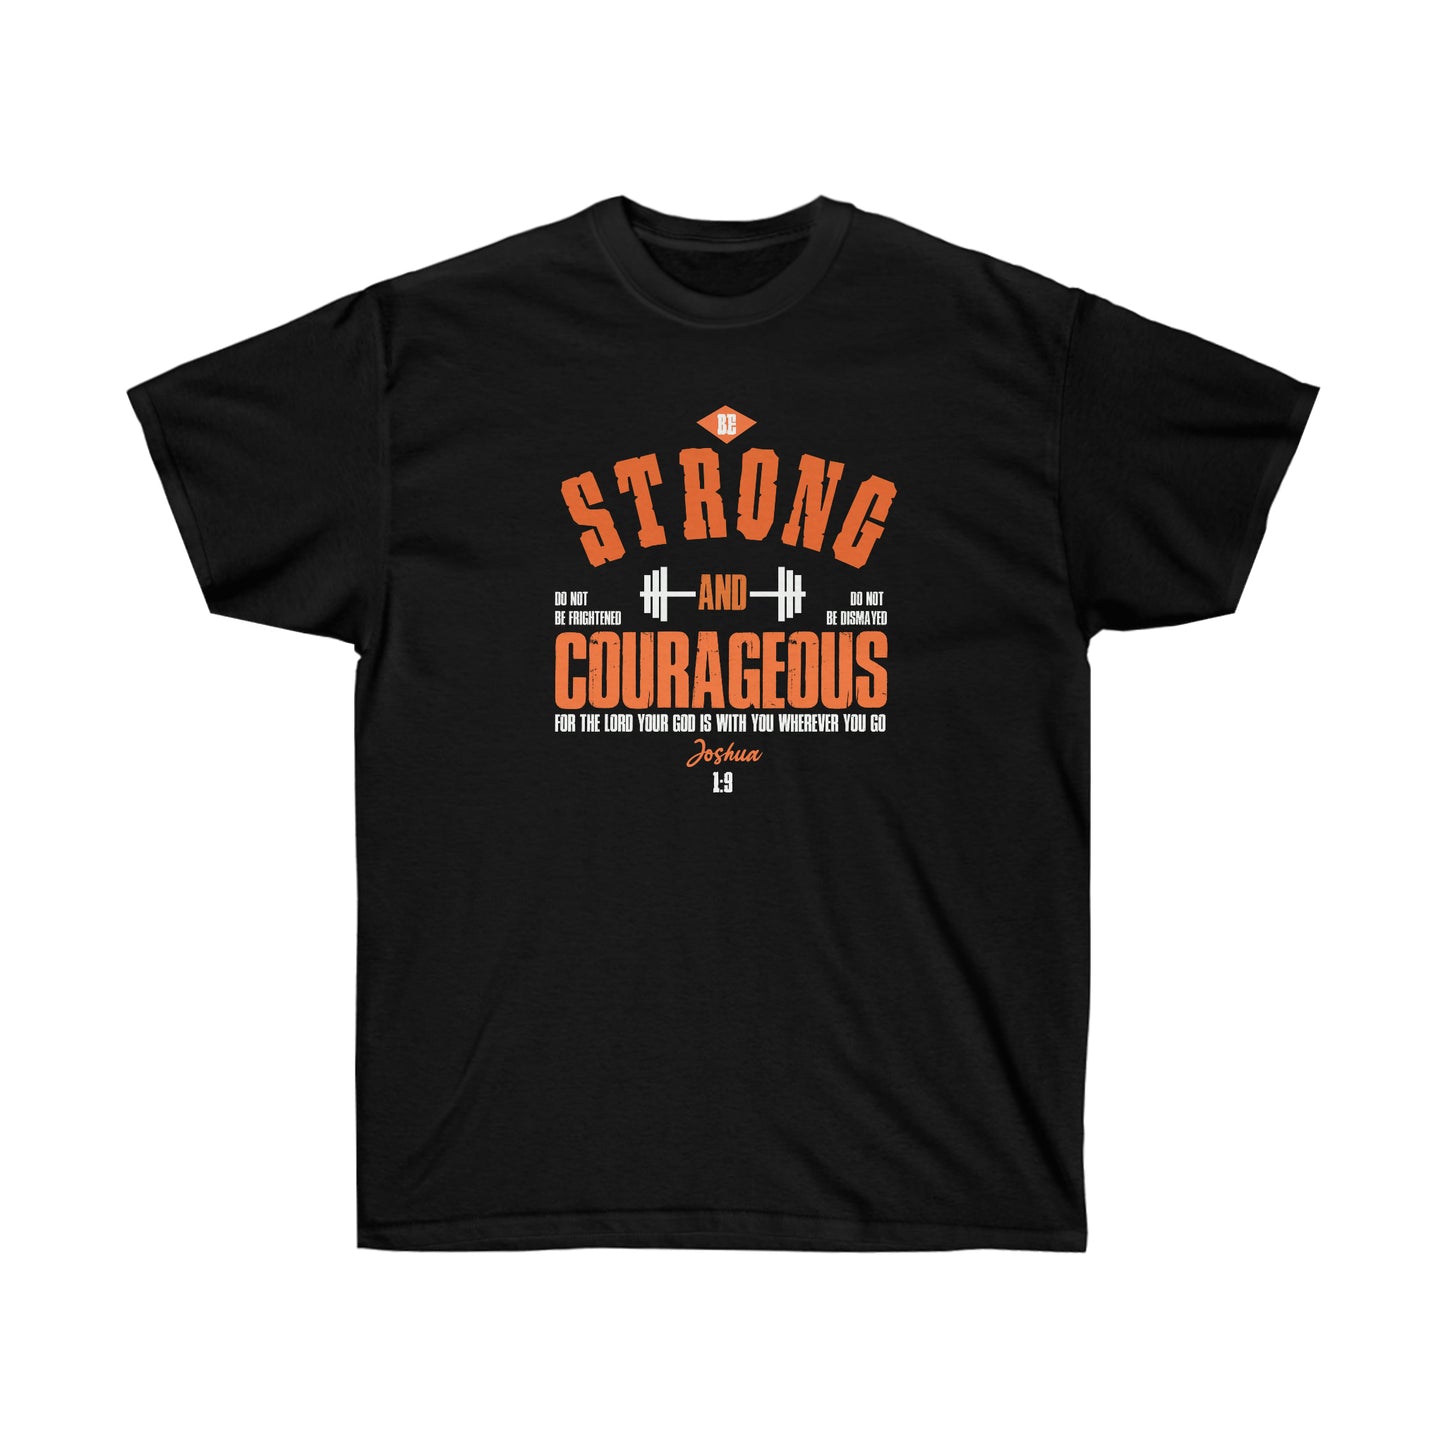 Be strong and Courageous - Unisex Ultra Cotton Tee